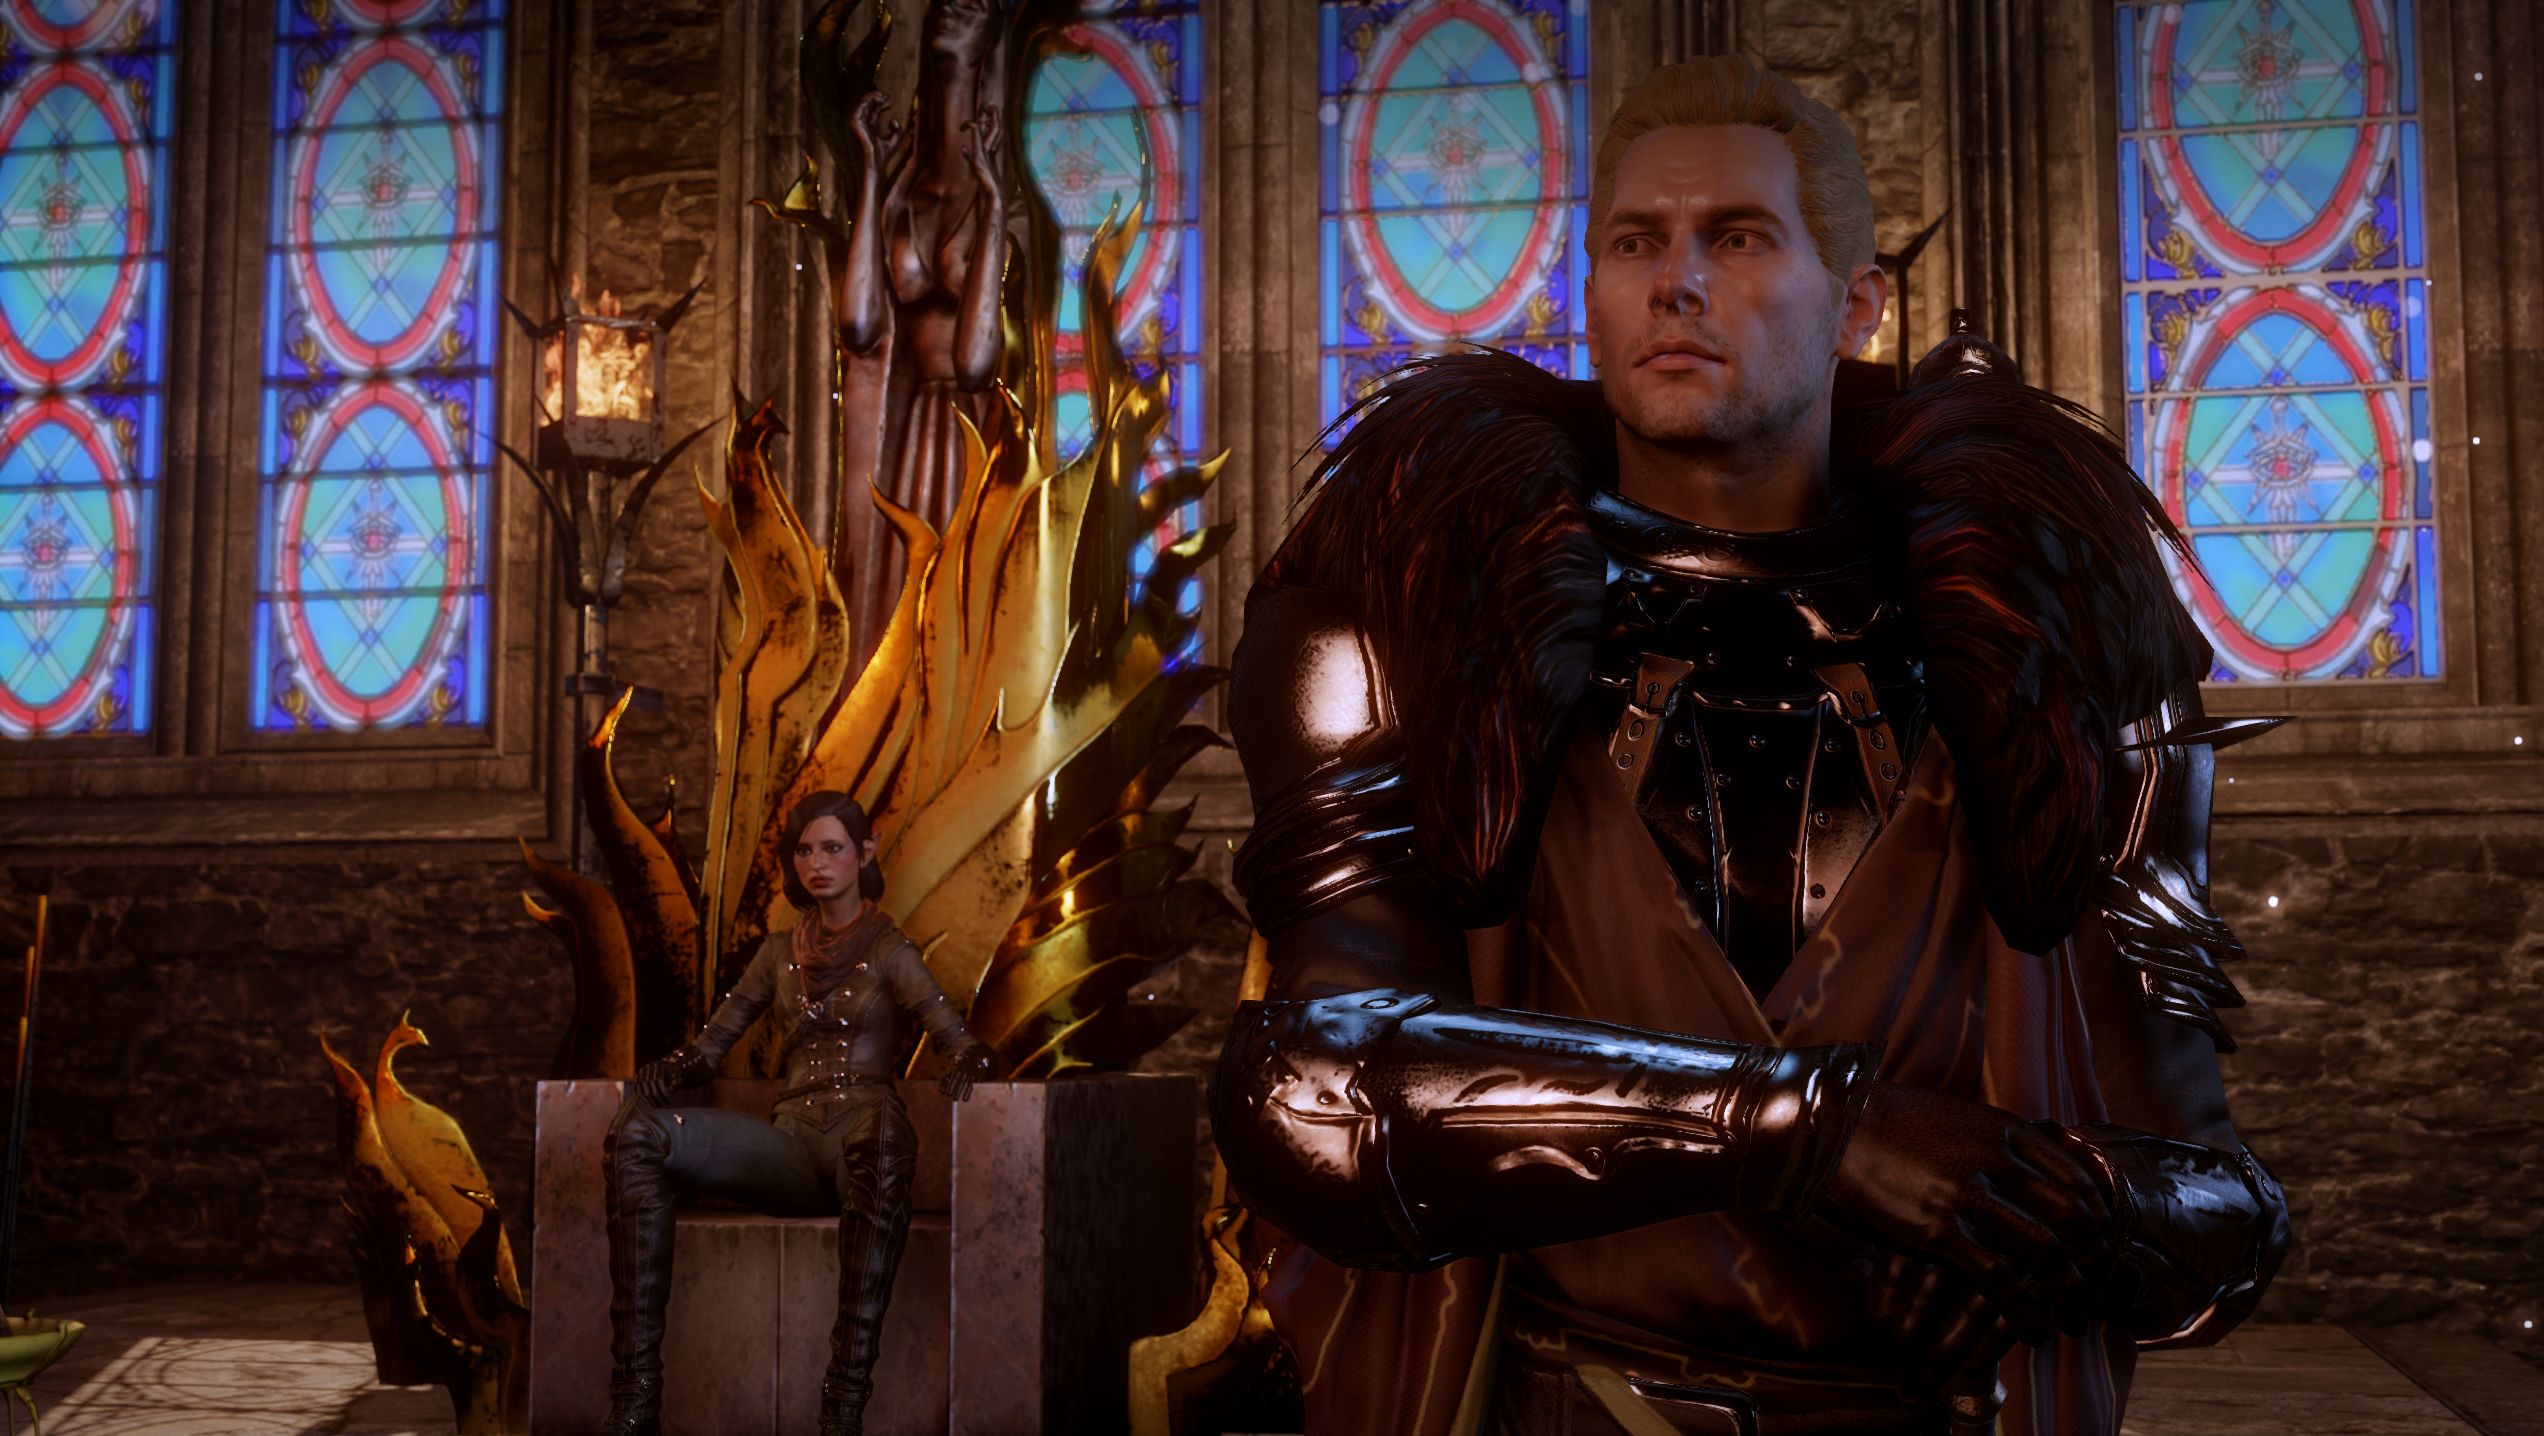 Dragon Age Inquisition Dragon Age Cullen Rutherford Inquisitor PC Gaming 2544x1436